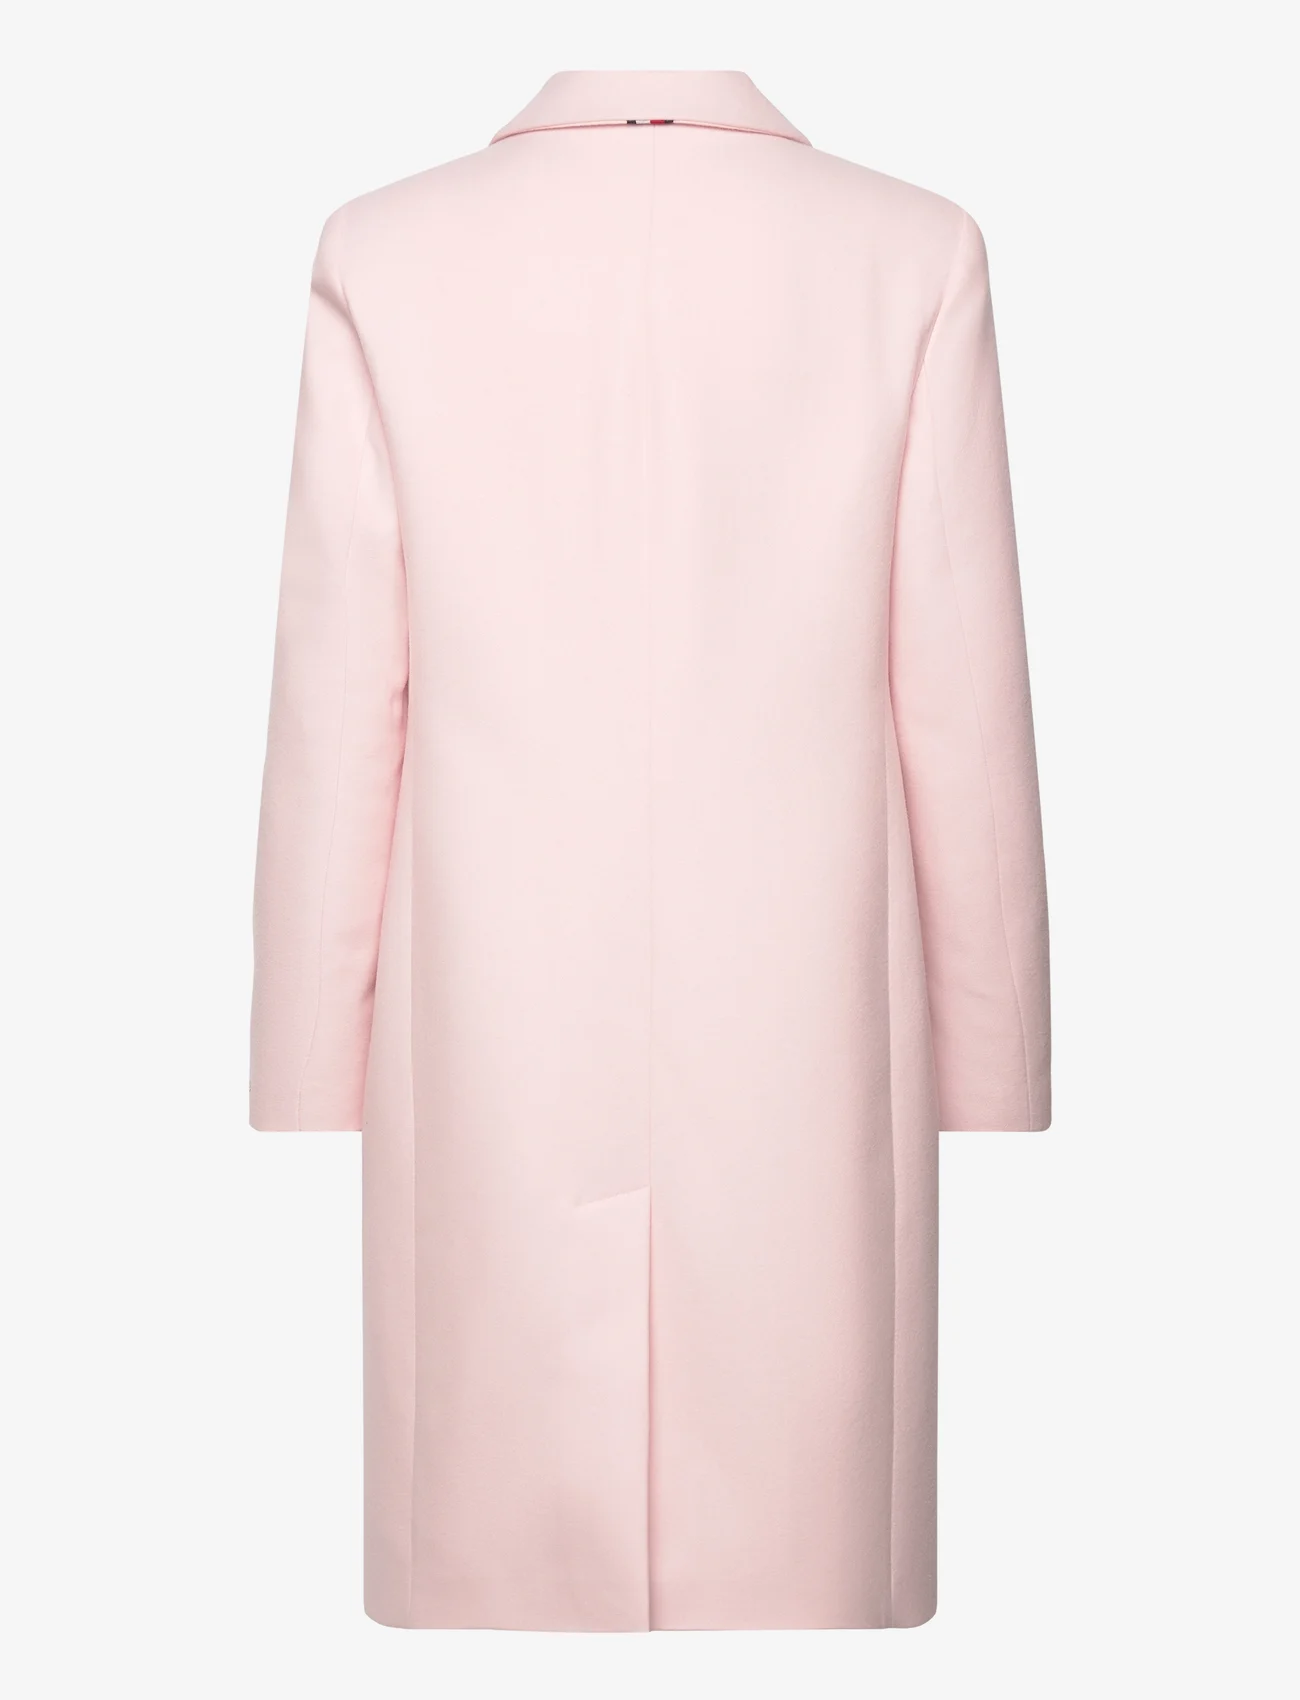 Tommy Hilfiger - CLASSIC LIGHT WOOL BLEND COAT - Žieminiai paltai - whimsy pink - 1